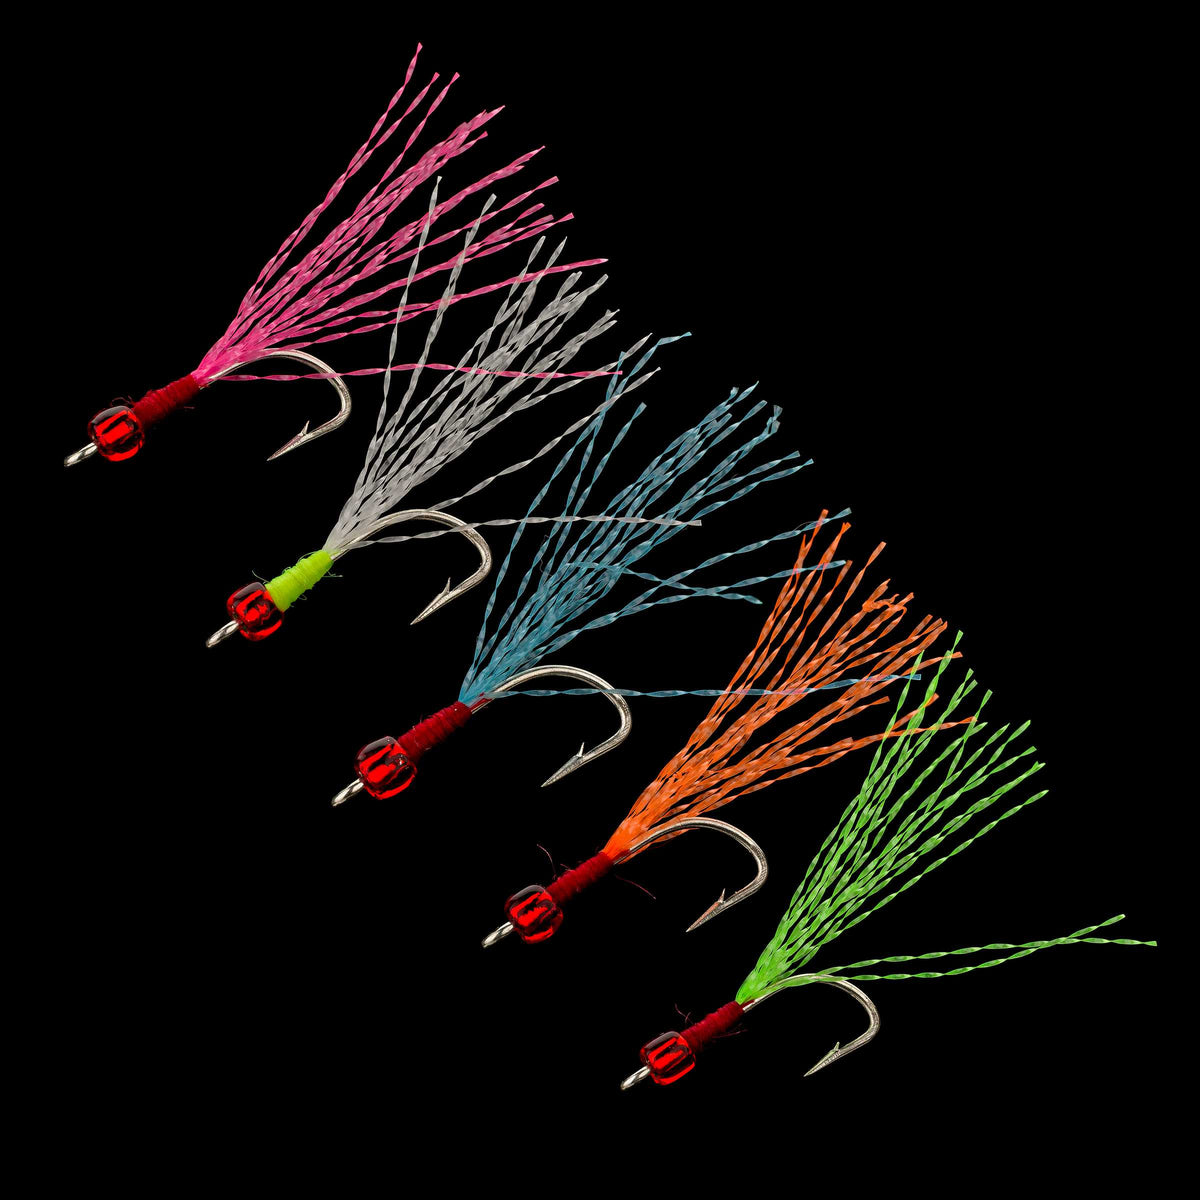 Light-up your Night Tackle, Charge-up your Glow Baits - Share the